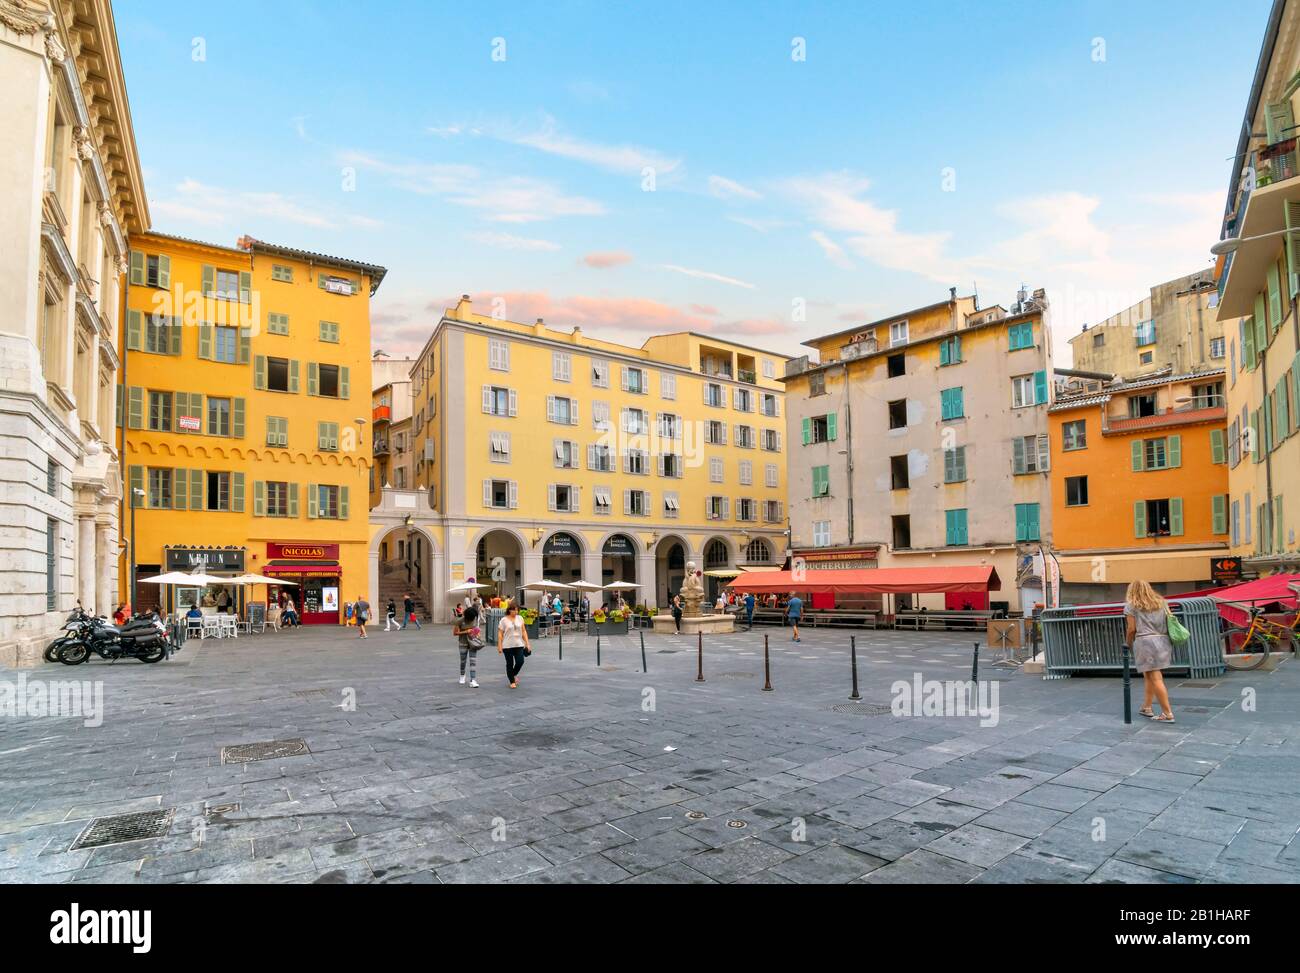 Tourists and locals pass through the Place Rossetti piazza in the Old Town Vieux Nice area early in the morning before crowds arrive. Stock Photo